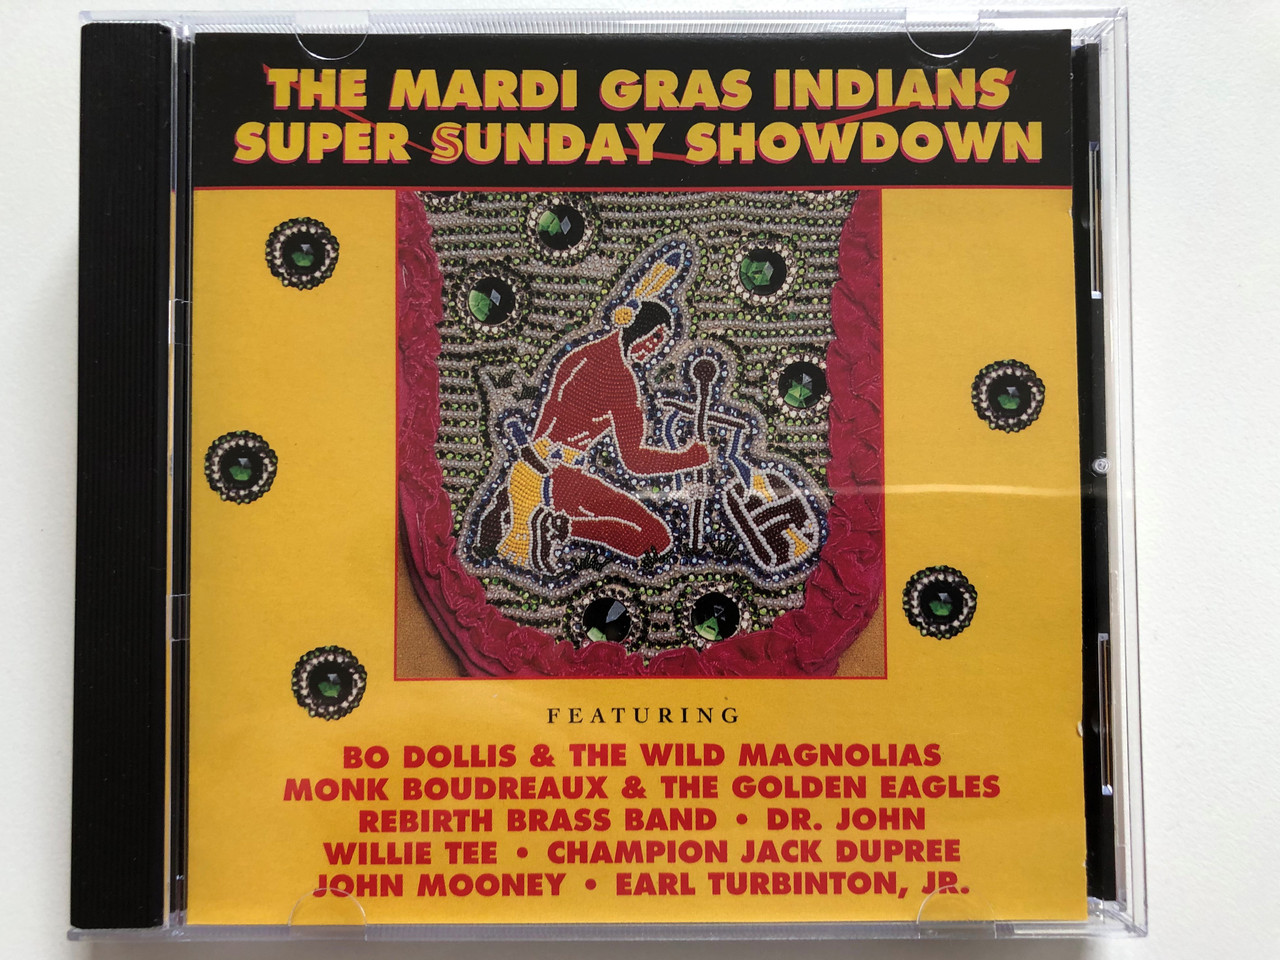 https://cdn10.bigcommerce.com/s-62bdpkt7pb/products/30293/images/179272/The_Mardi_Gras_Indians_Super_Sunday_Showdown_Featuring_Bo_Dollis_The_Wild_Magnolias_Monk_Boudreaux_The_Golden_Eagles_Rebirth_Brass_Band_Dr._John_Willie_Tee_Rounder_Records_Audio_CD_1__25660.1622100281.1280.1280.JPG?c=2&_ga=2.253380745.124754382.1622221975-1131994027.1622221975